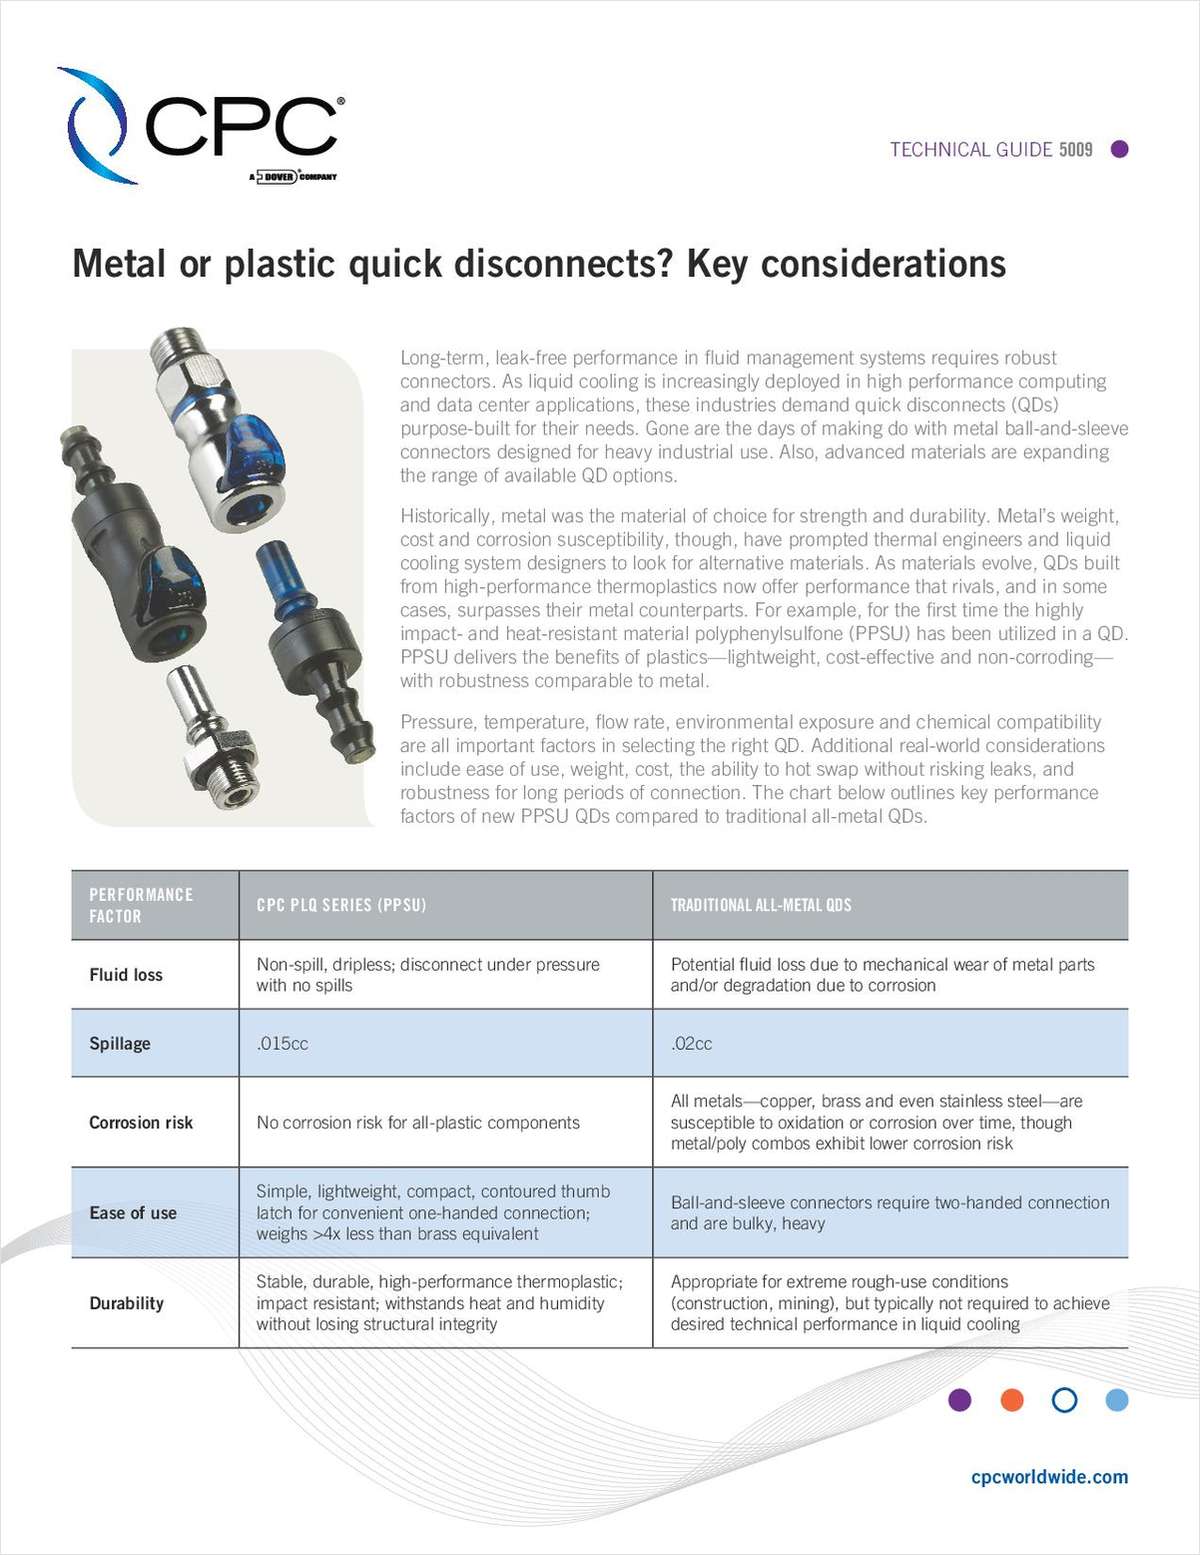 Metal or Plastic Quick Disconnects? Key Considerations